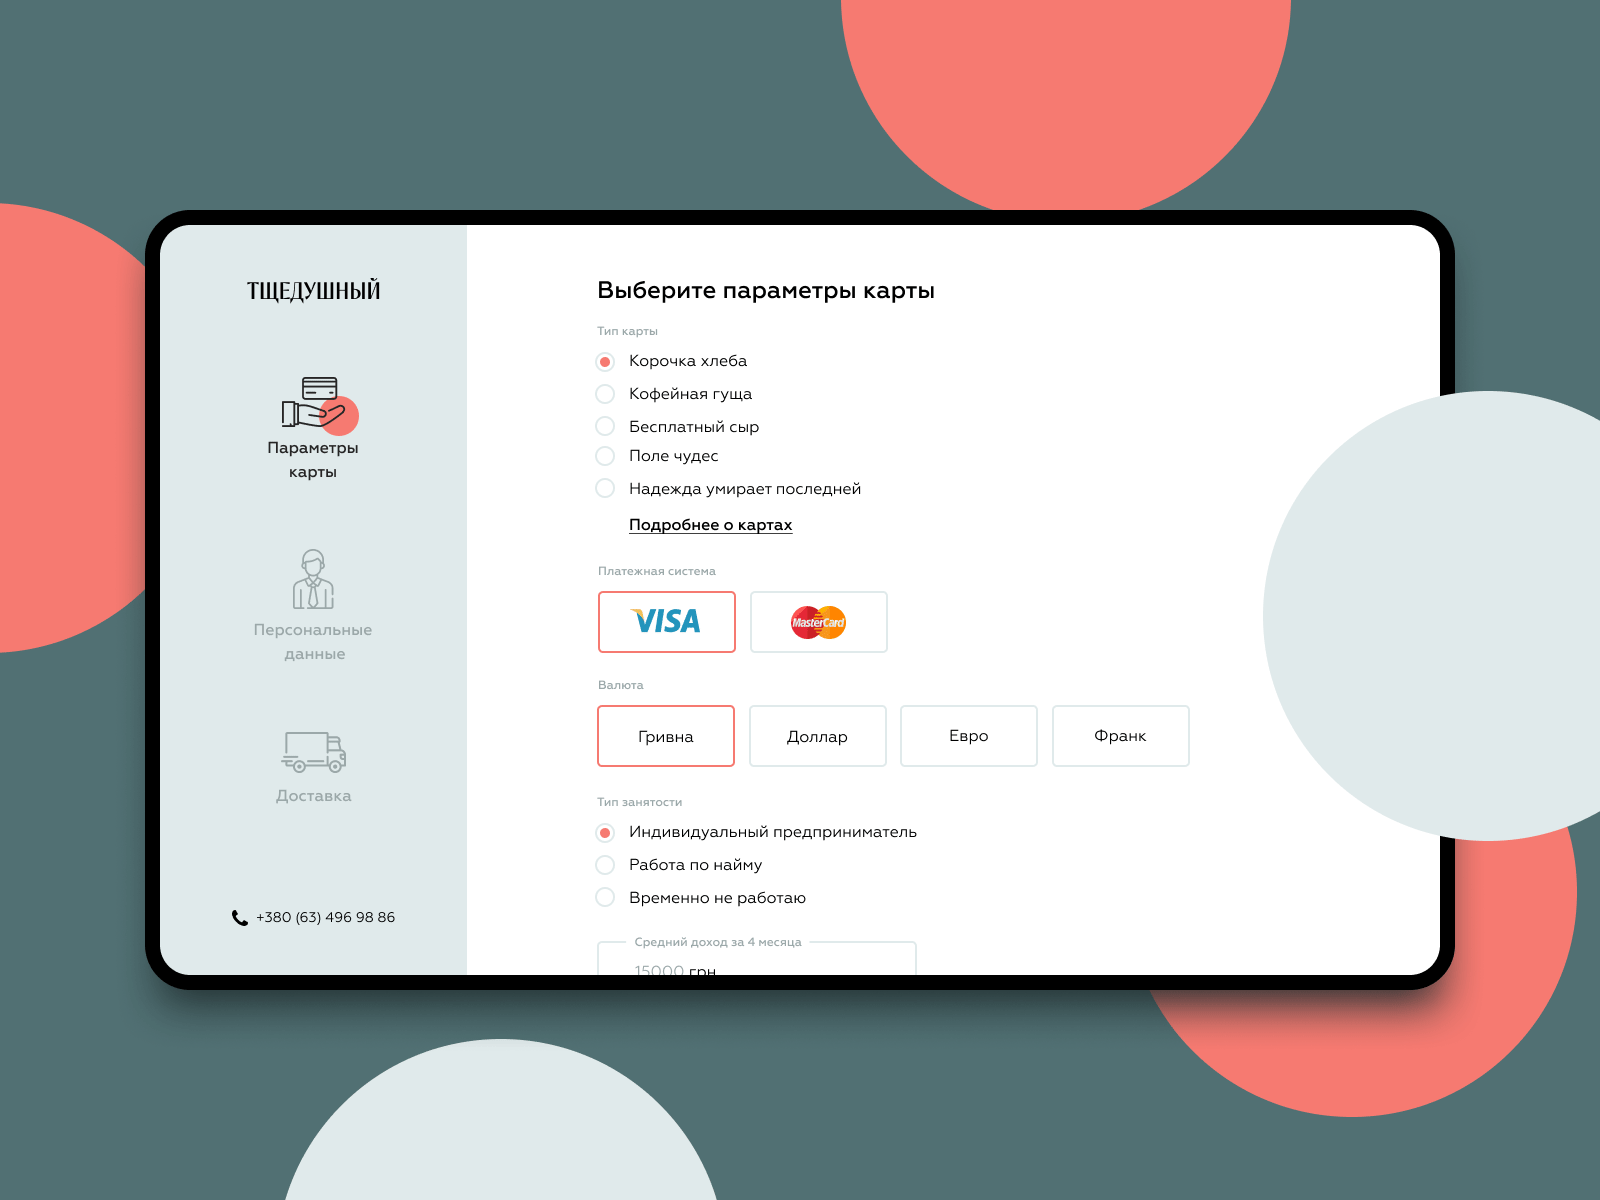 Application Form Interaction